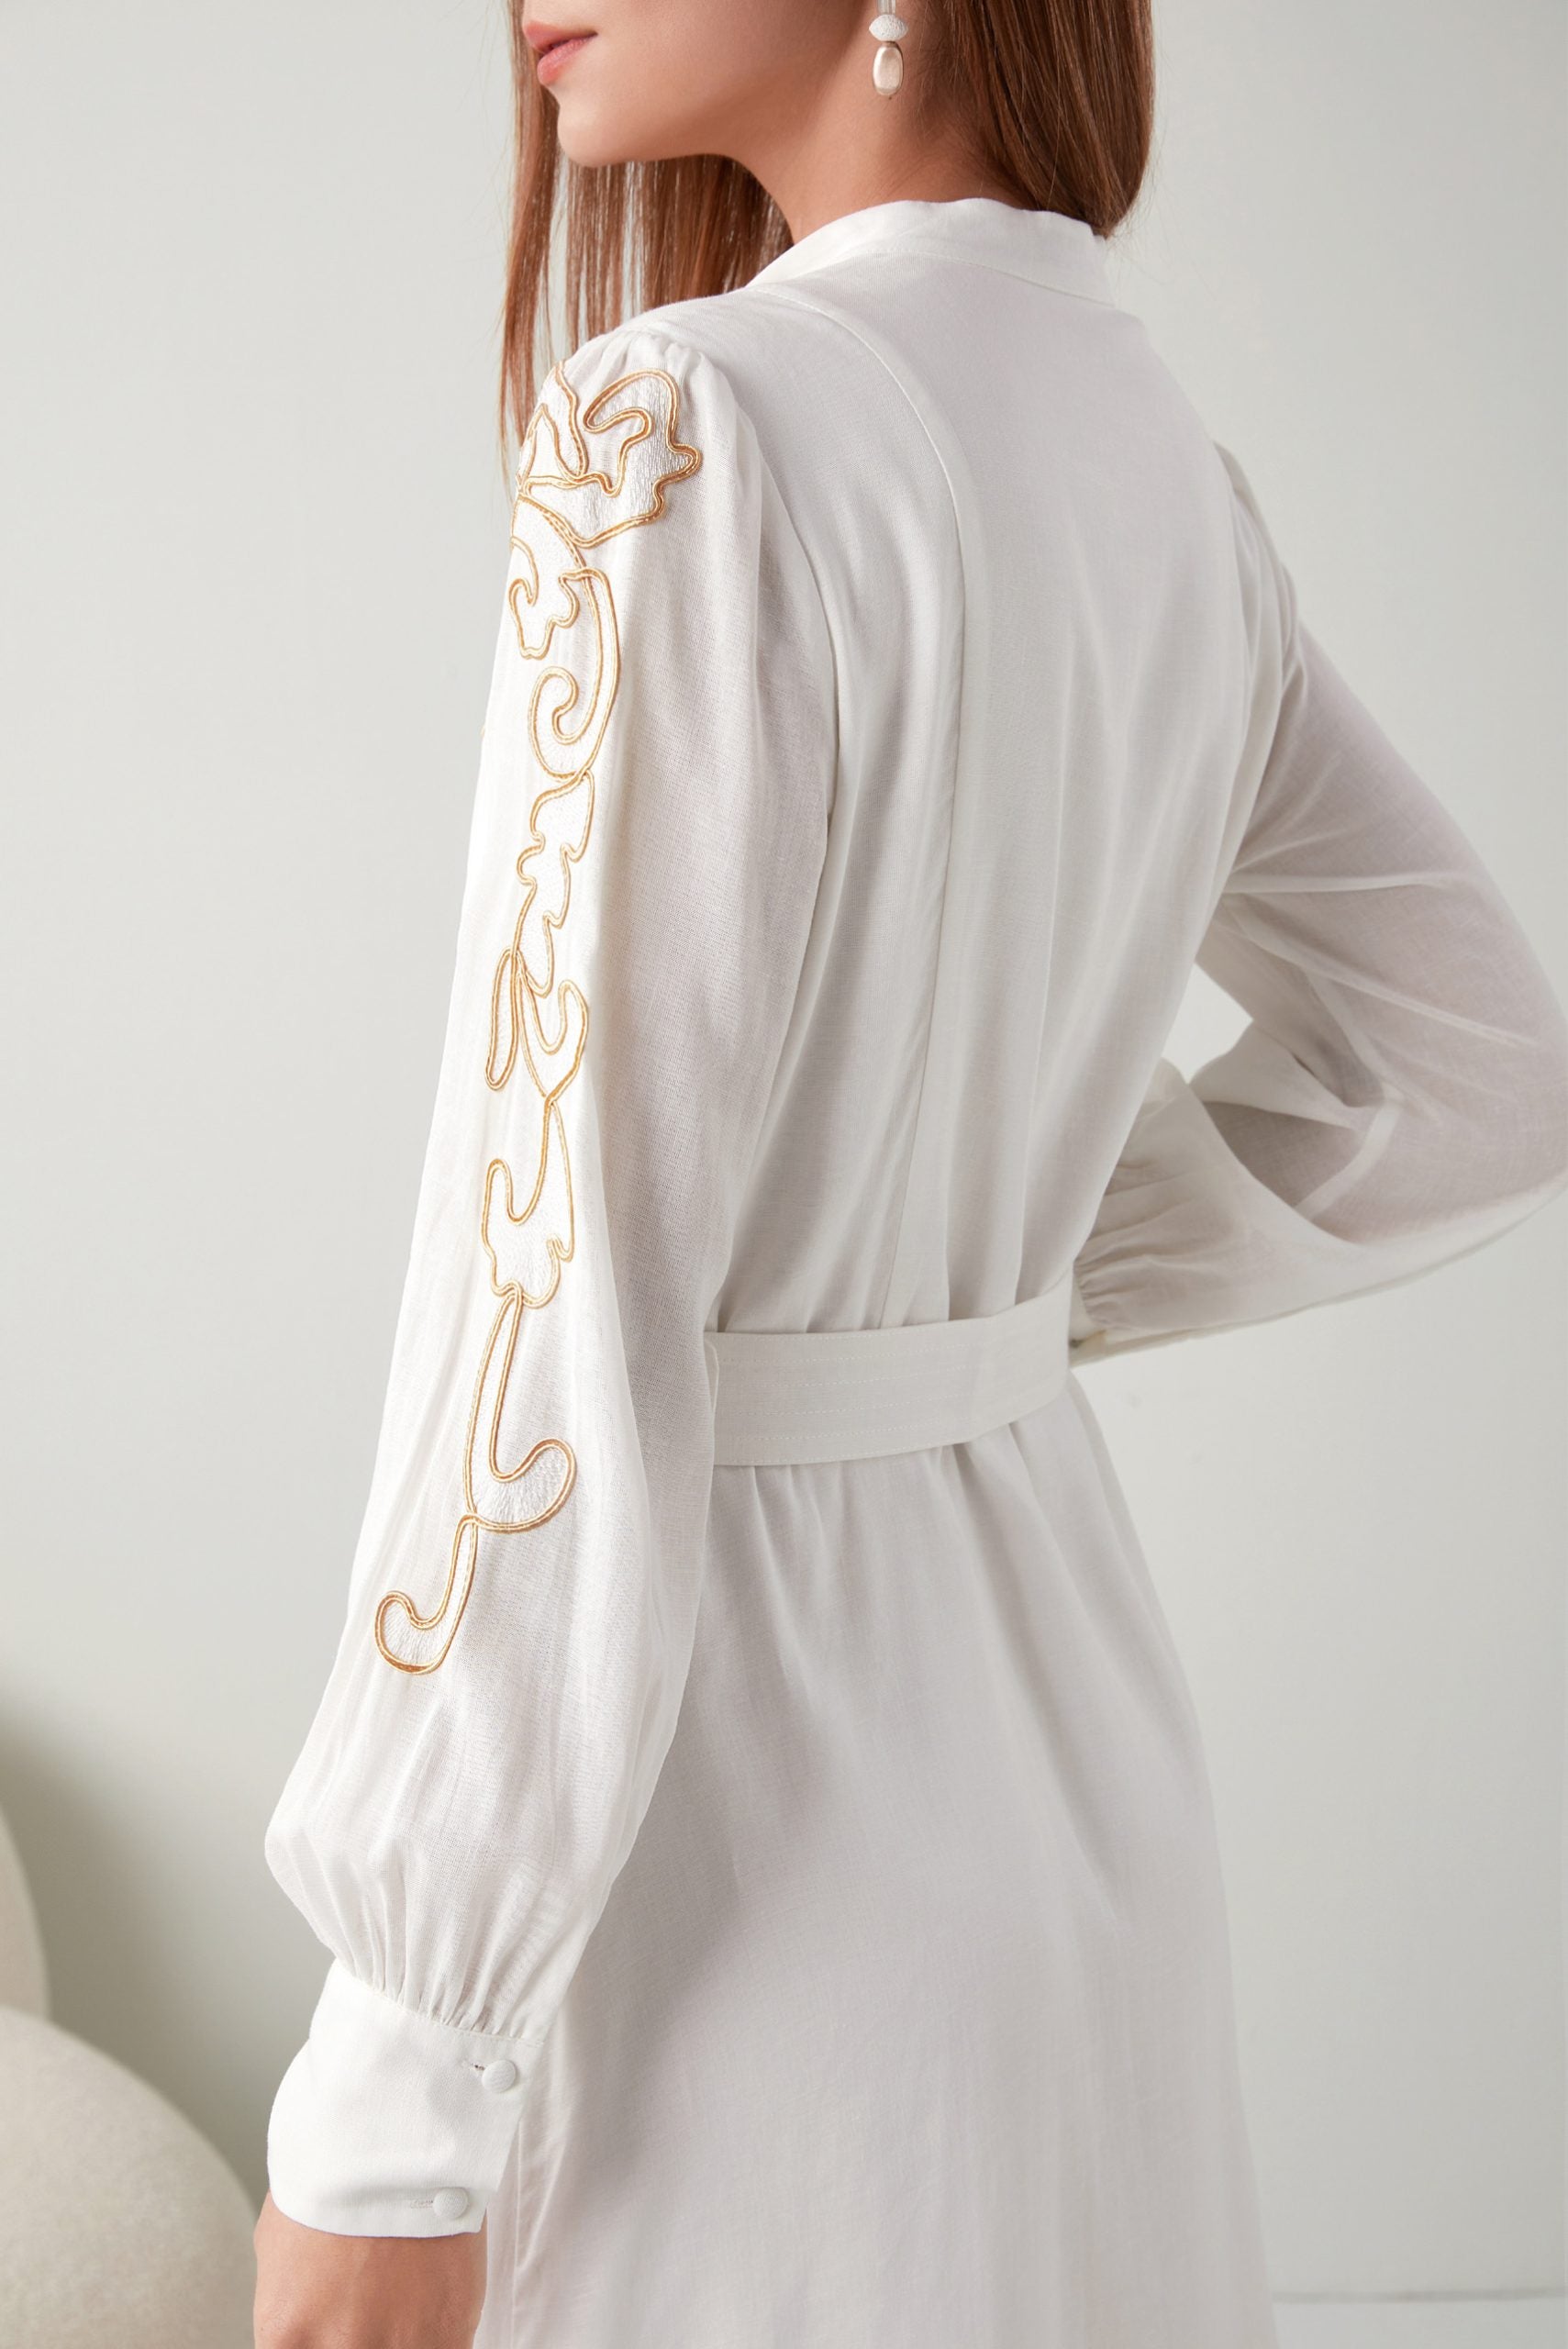 &quot;Chic meets charm: Embroidered short white dress. Discover your perfect summer look!&quot;